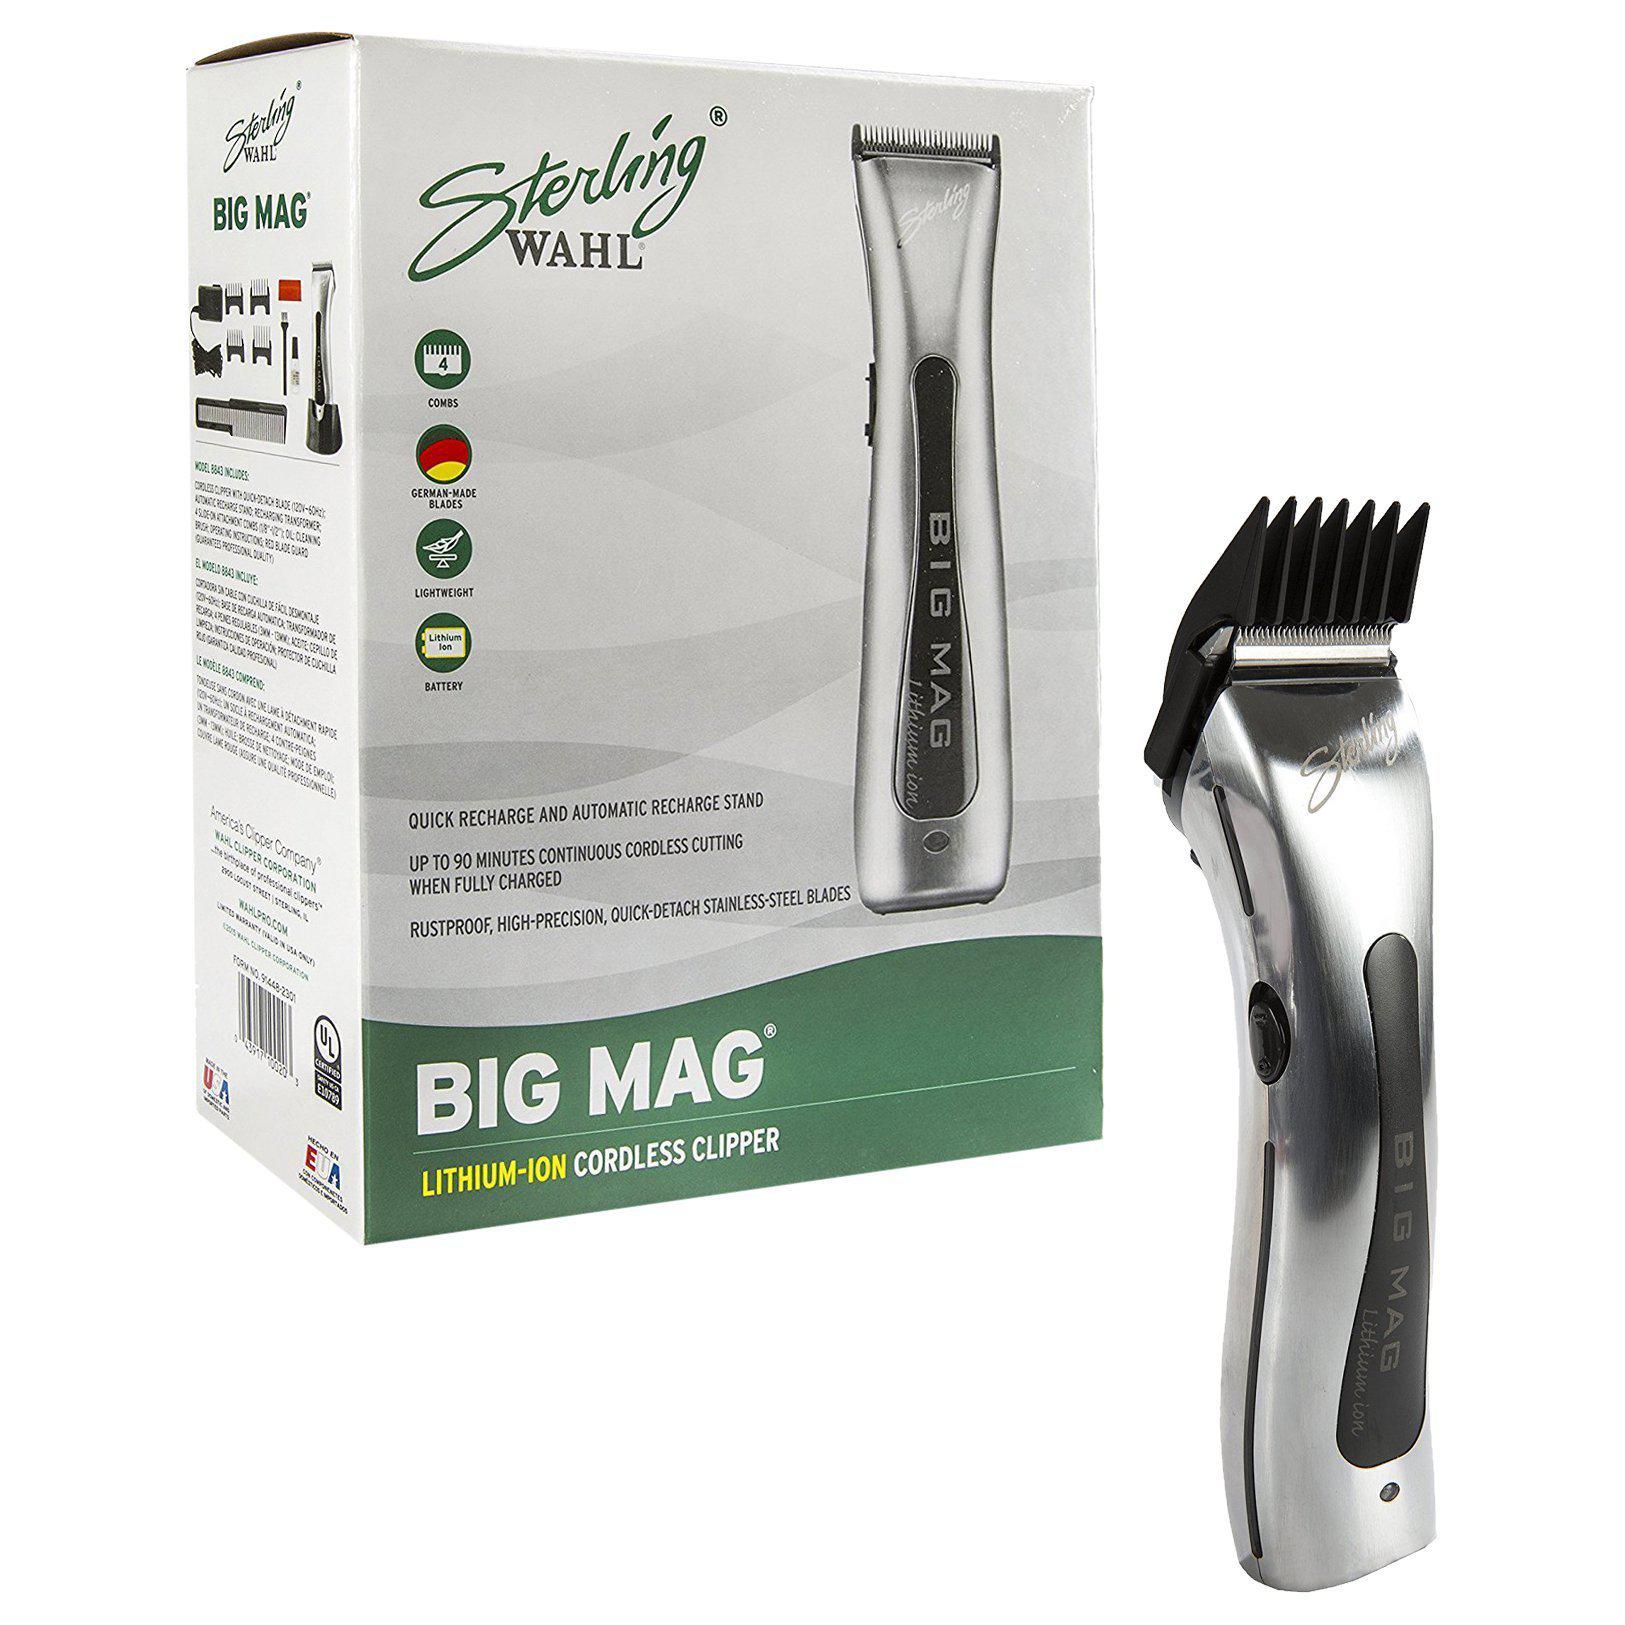 wahl sterling mag replacement blade